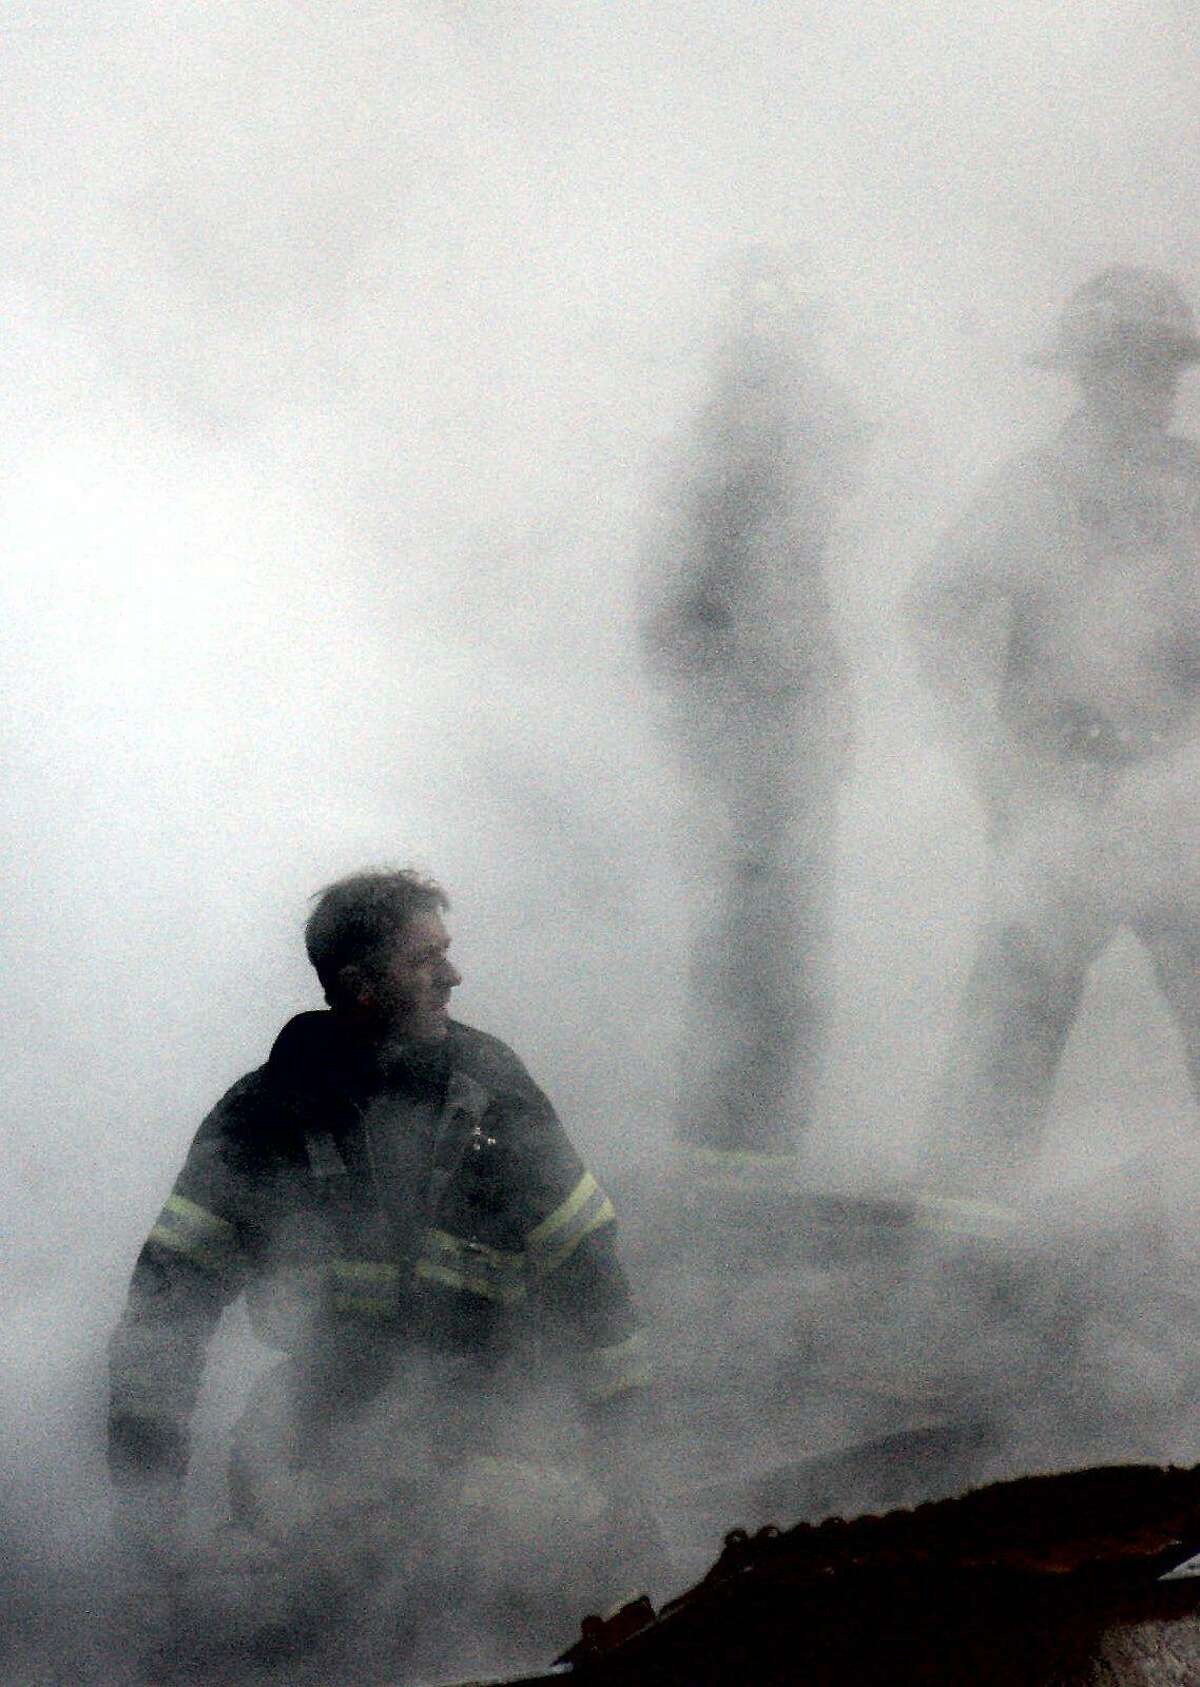 In this Sept. 14, 2001 file photo, a firefighter emerges from the smoke and debris of the World Trade Center in New York.